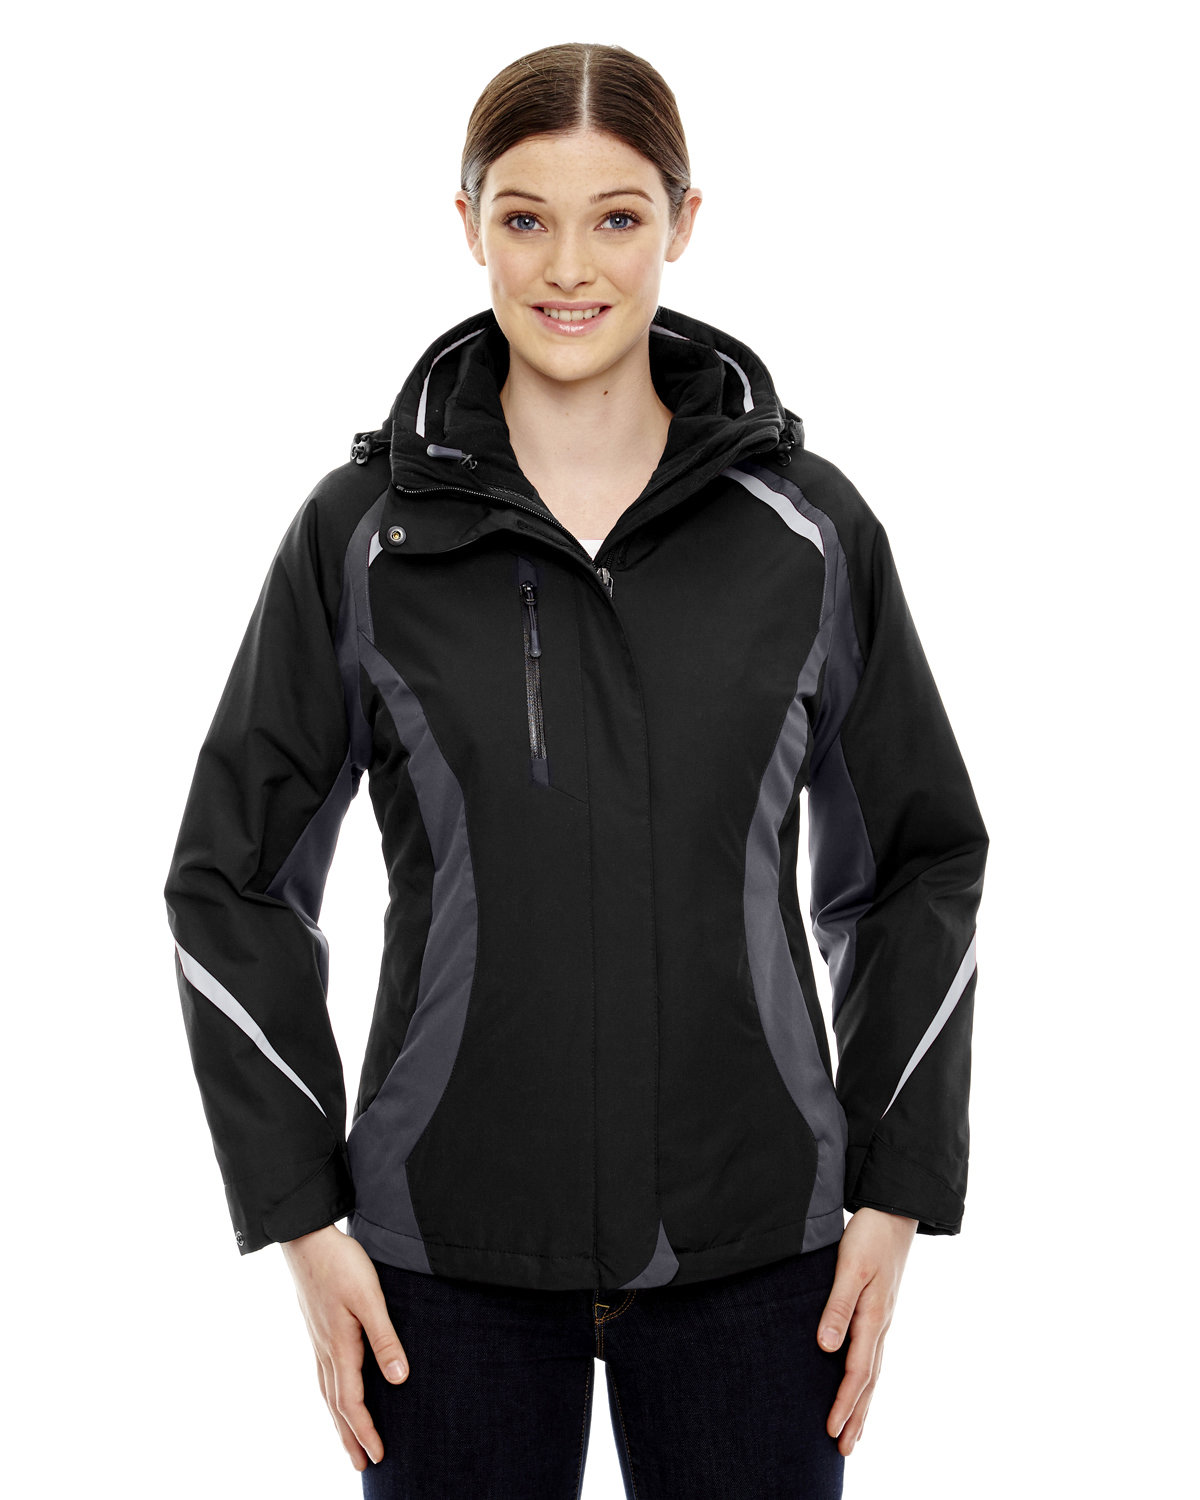 North End 78195 - Ladies' Height 3-In-1 Jacket With Insulated Liner